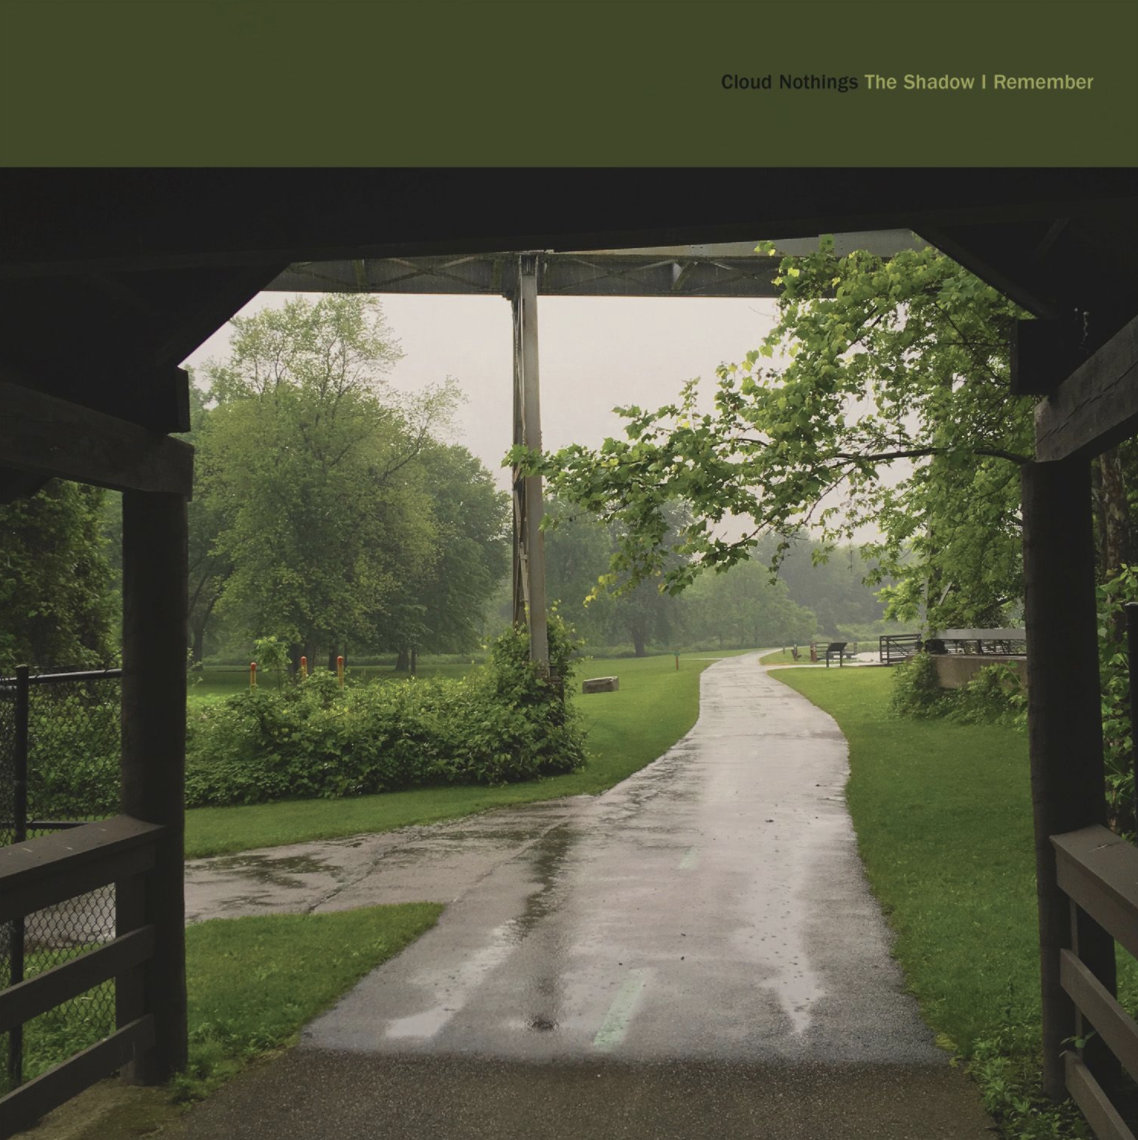 Cloud Nothings Announce New Album <i></noscript>
<p><em><strong>The Shadow I Remember </strong></em><strong>tracklist</strong></p>
<p>1. Oslo</p>
<p>2. Nothing Without You</p>
<p>3. The Spirit Of</p>
<p>4. Only Light</p>
<p>5. Nara</p>
<p>6. Open Rain</p>
<p>7. Sound Of Alarm</p>
<p>8. Am I Something</p>
<p>9. It’s Love</p>
<p>10. A Longer Moon</p>
<p>11. The Room It Was</p>
</p></p>    <div class=